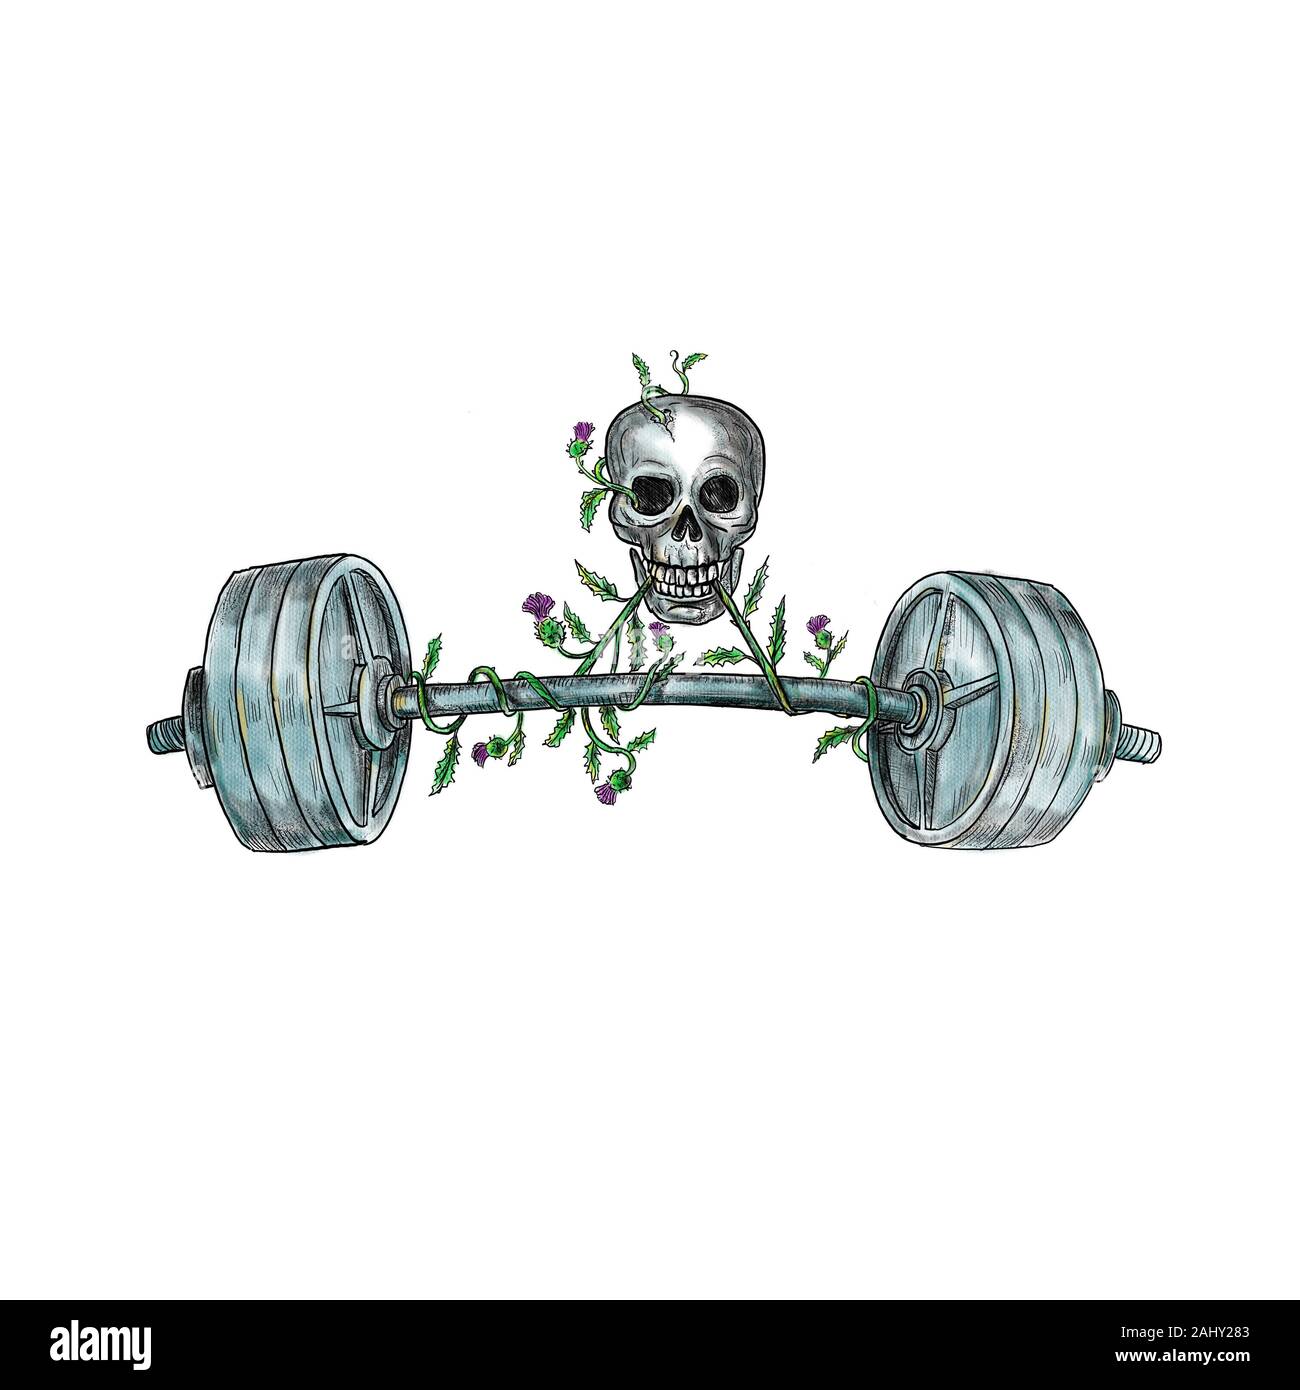 Tattoo style illustration of a skull lifting a heavy weight barbell with vine of Scottish thistle on isolated background. Stock Photo